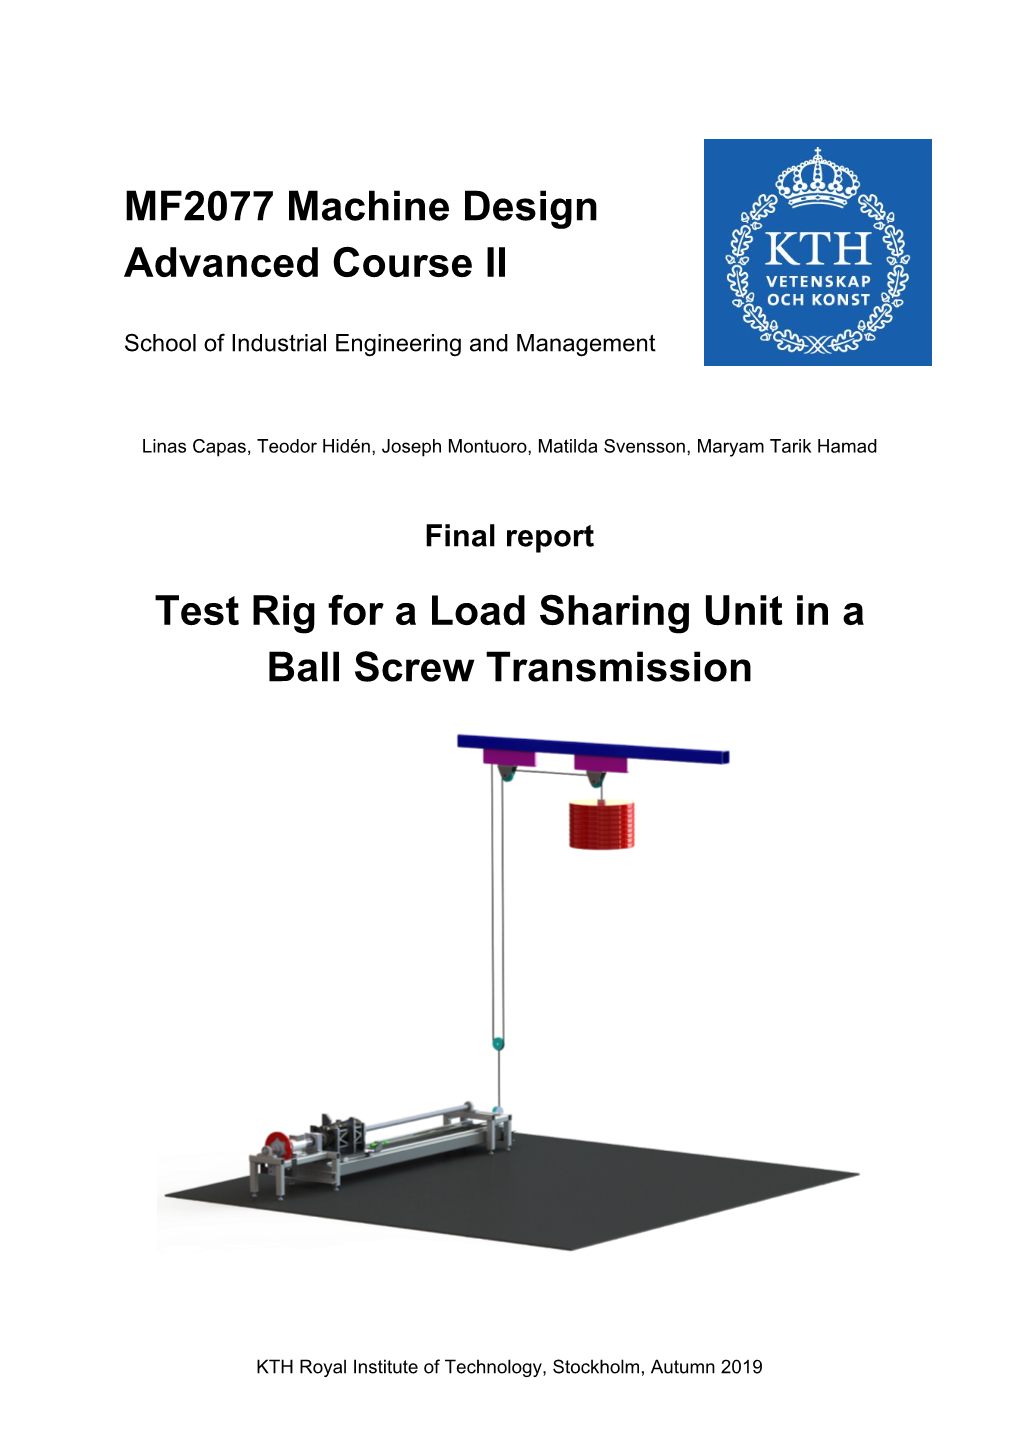 MF2077 Machine Design Advanced Course II Test Rig for a Load Sharing Unit in a Ball Screw Transmission